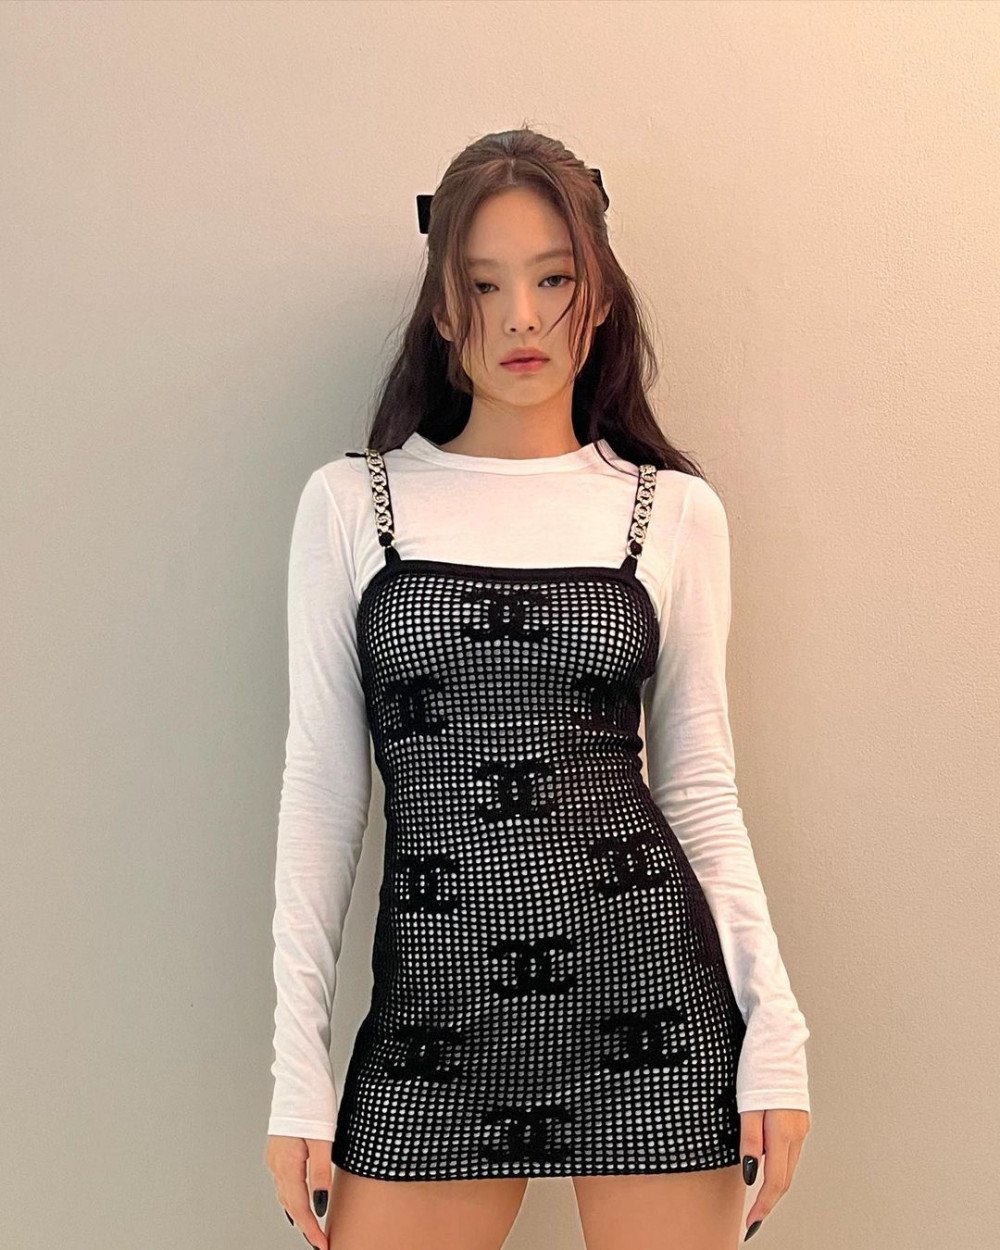 10+ Times BLACKPINK's Jennie Proved She's Chanel In Human Form